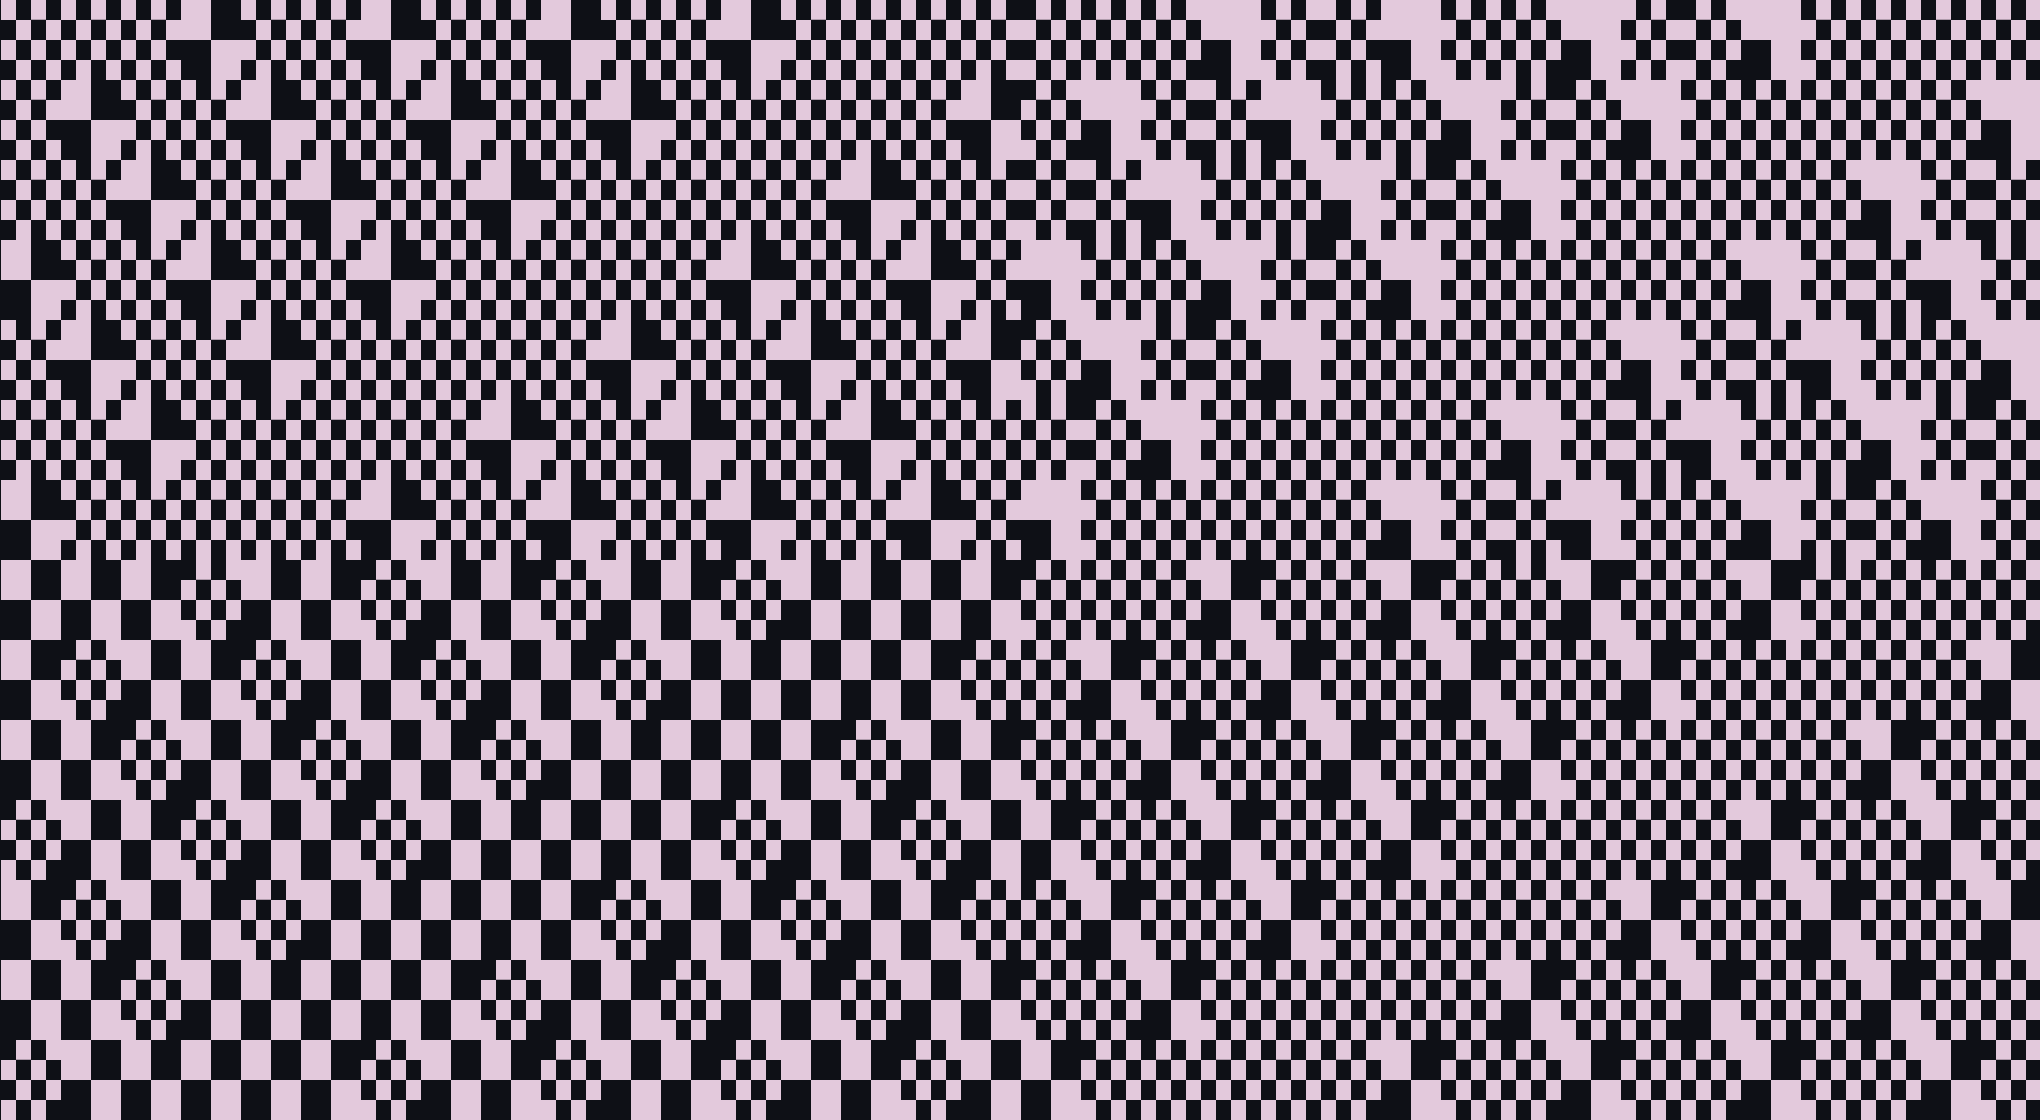 Pattern consisting of different sized rectangles